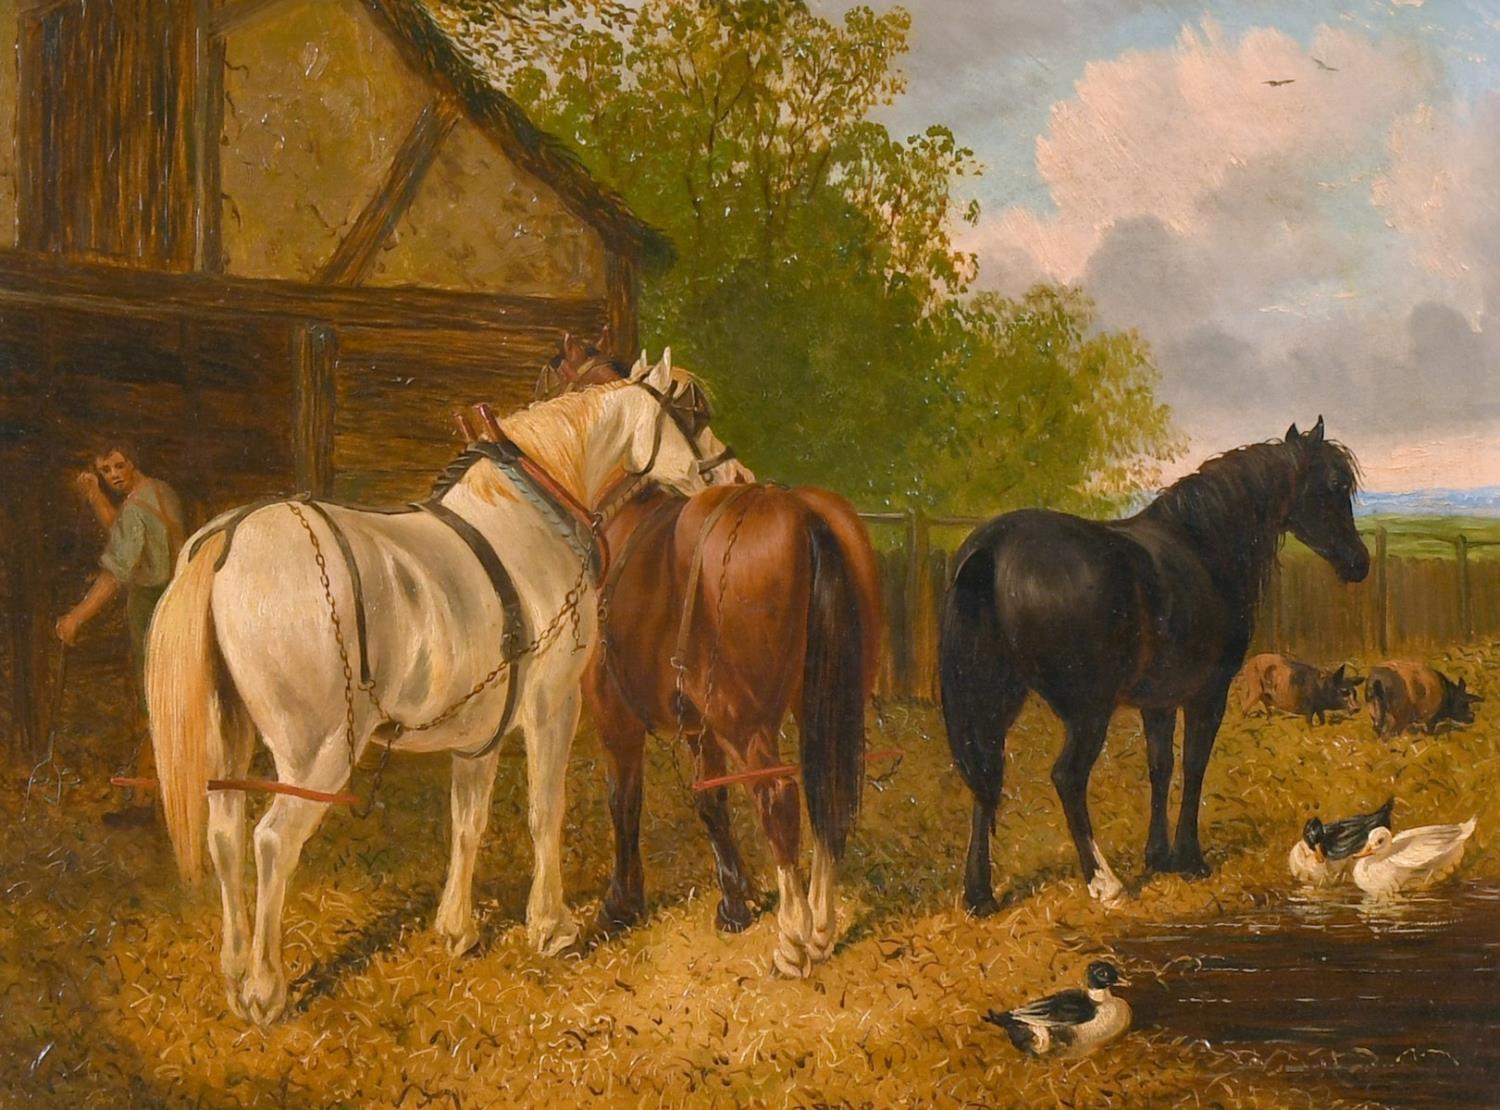 VICTORIAN OIL - HORSES DUCKS & PIGS RURAL FARMYARD SCENE ENGLISH LANDSCAPE - Painting by Unknown